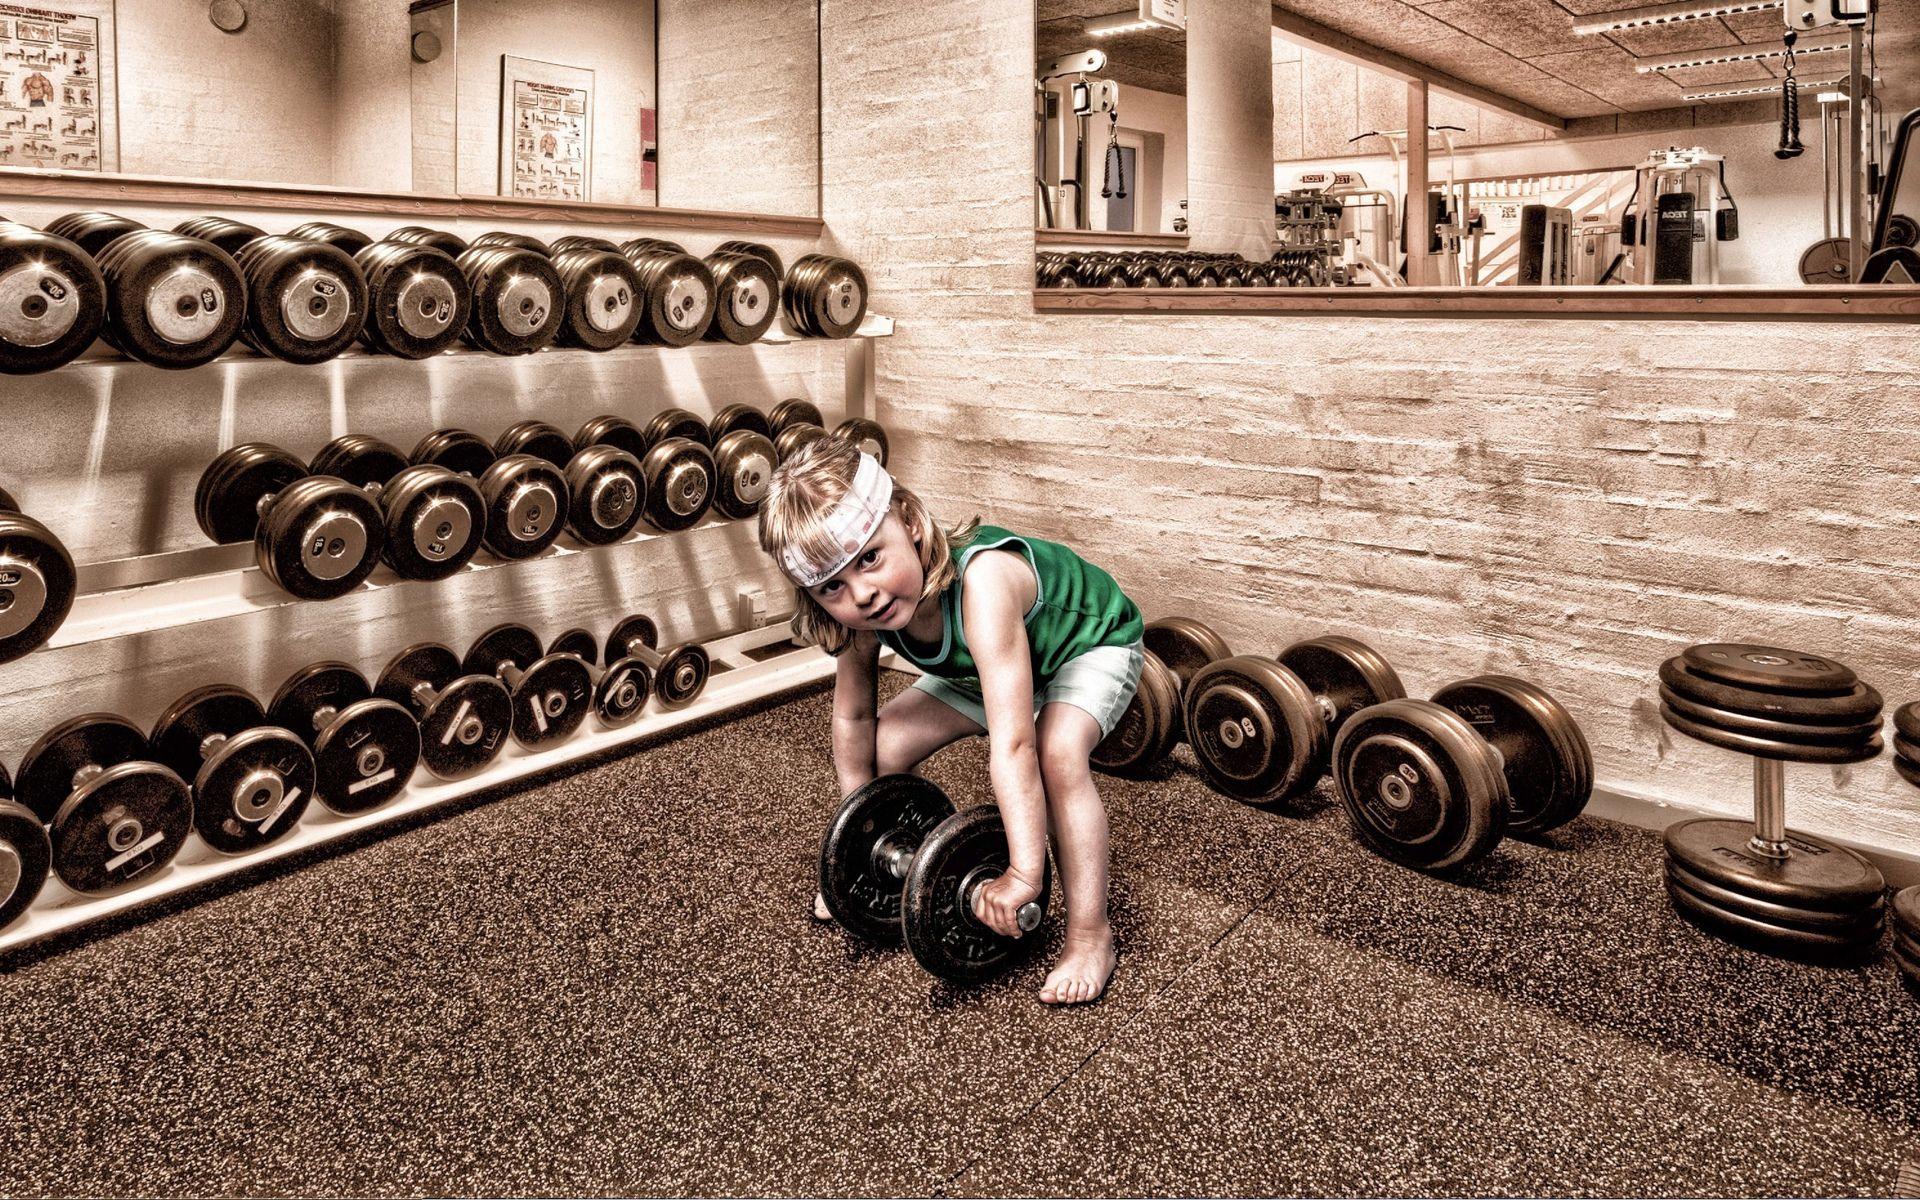 Kid with dumbbells in the gym wallpaper download. Wallpaper